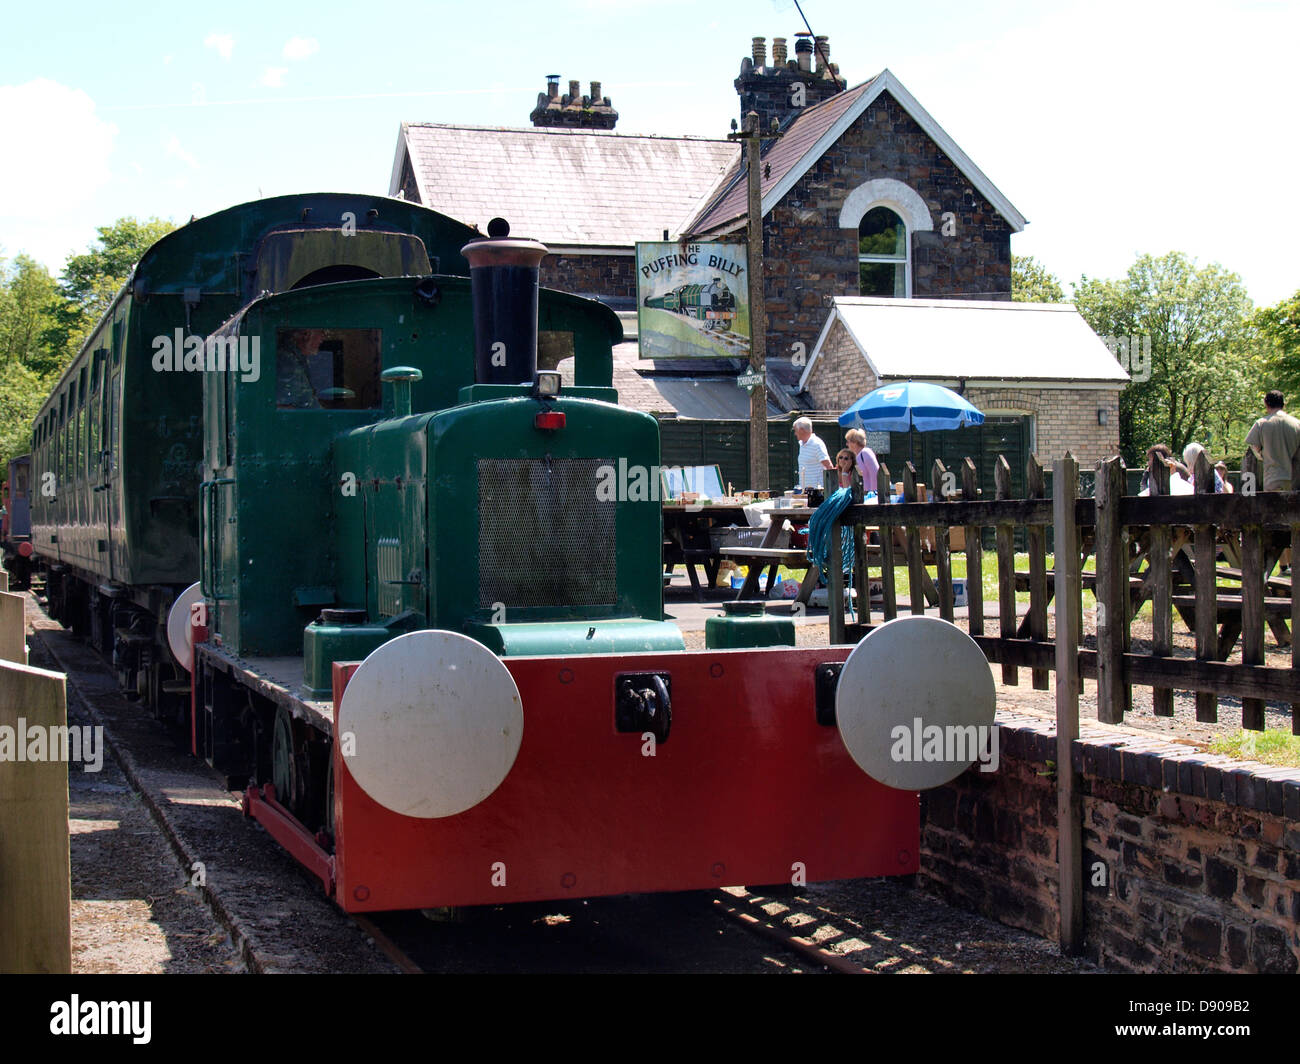 The Tarka Valley Railway Group and the Puffing Billy pub, Great Torrington, Devon, UK 2013 Stock Photo